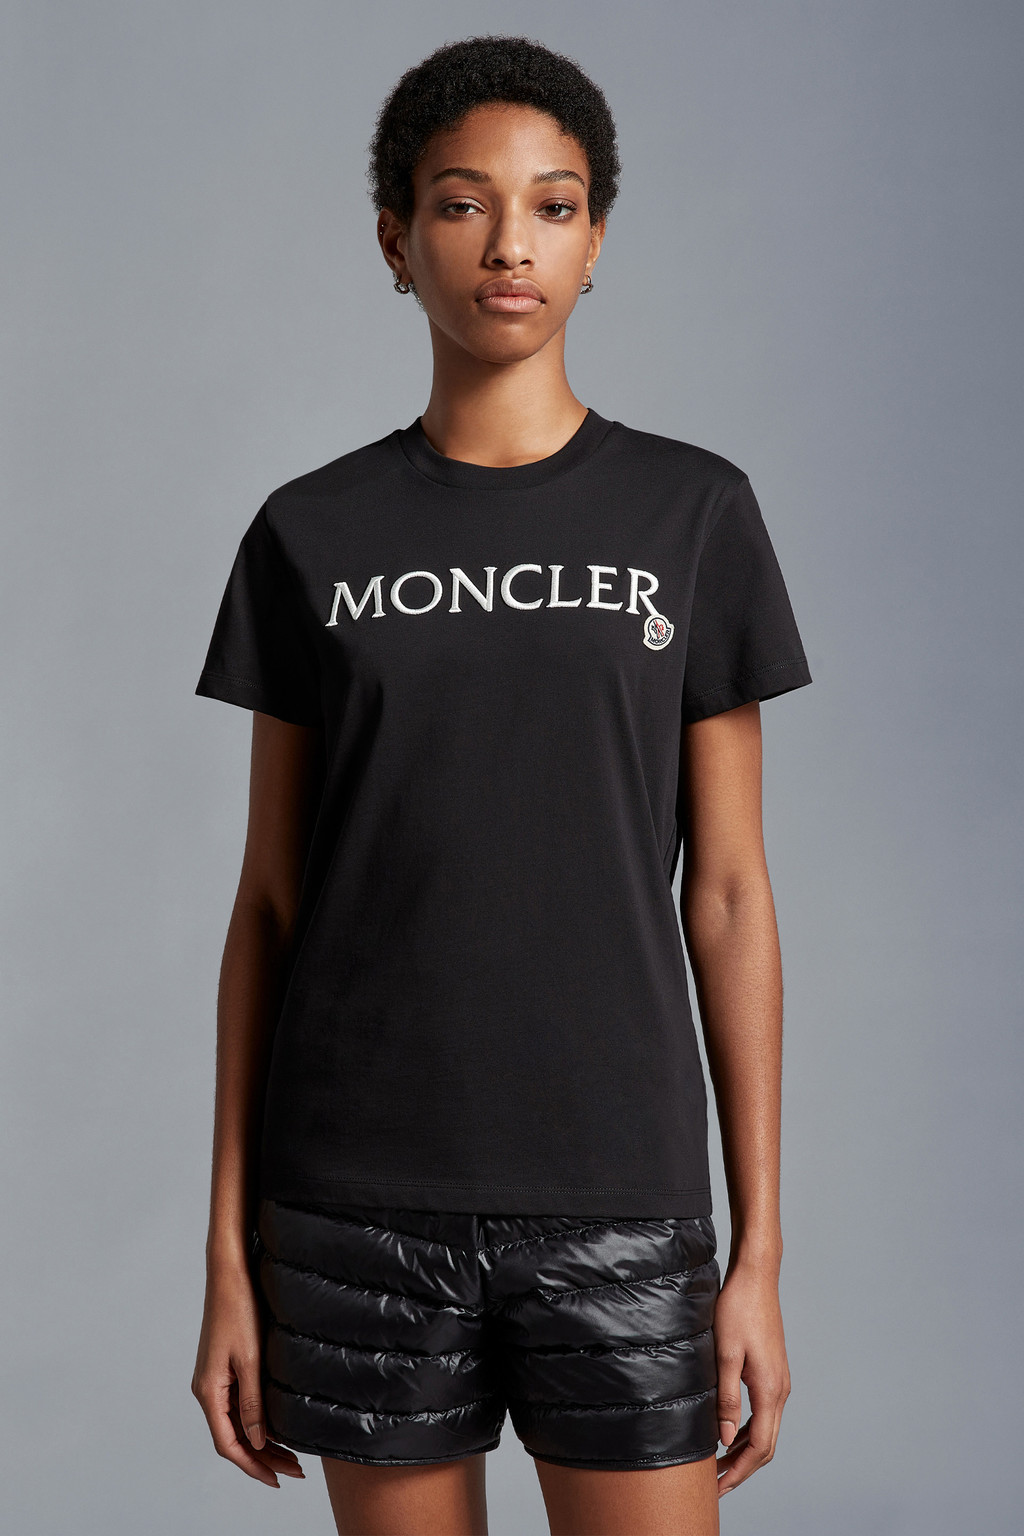 MONCLER モンクレール TシャツMoncle